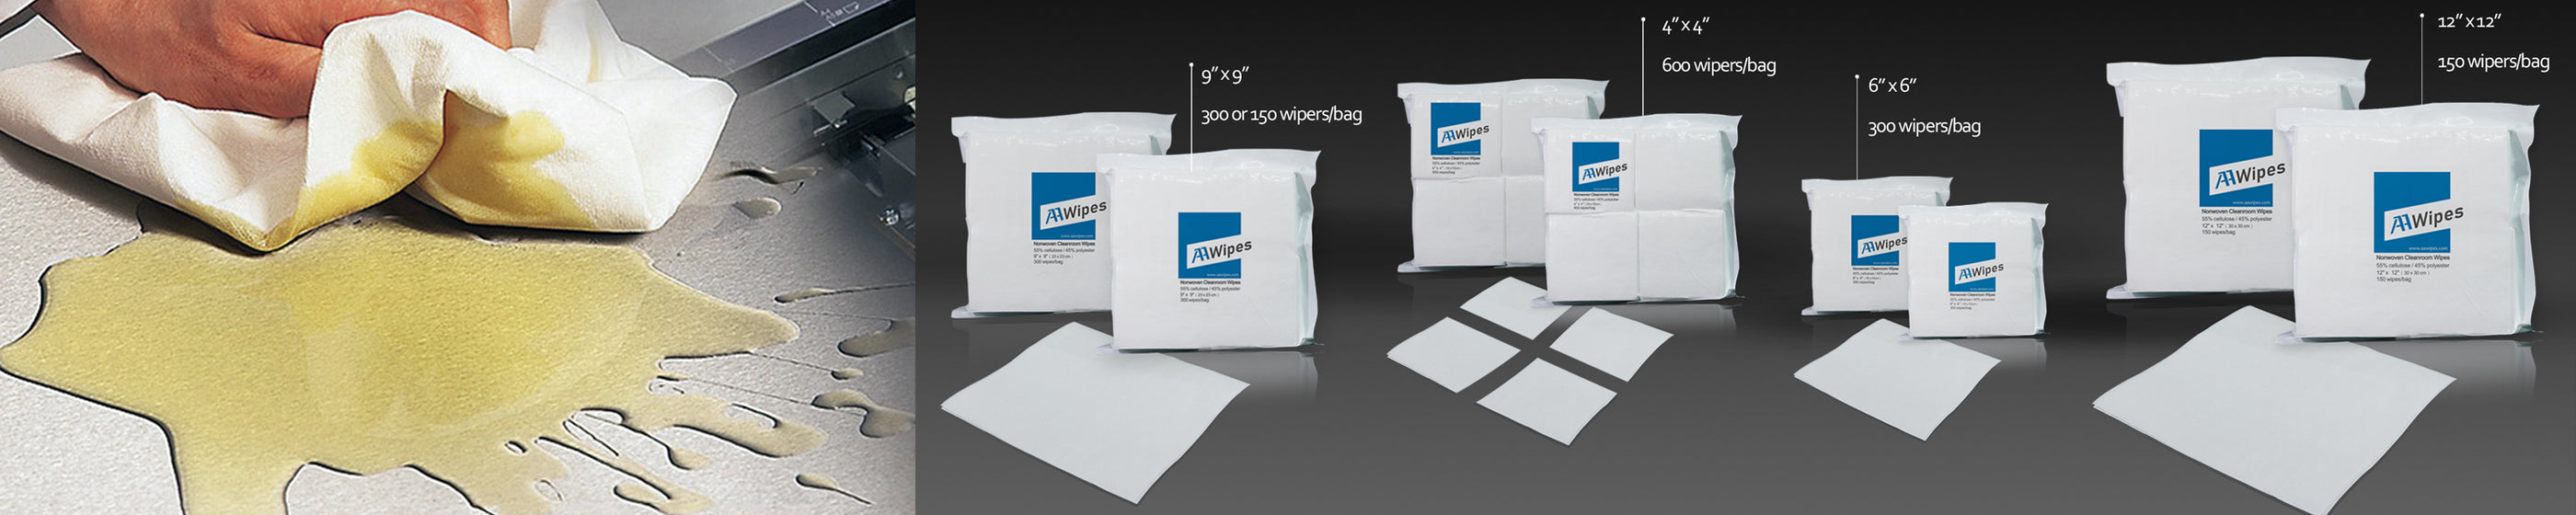 The nonwoven wipes products are recommended for use in a cleanroom Class 1,000-10,000 (ISO 6-7) critical environment. It is a highly absorbent wiper for general purpose and “multi-tasking” environmental / facility cleaning.